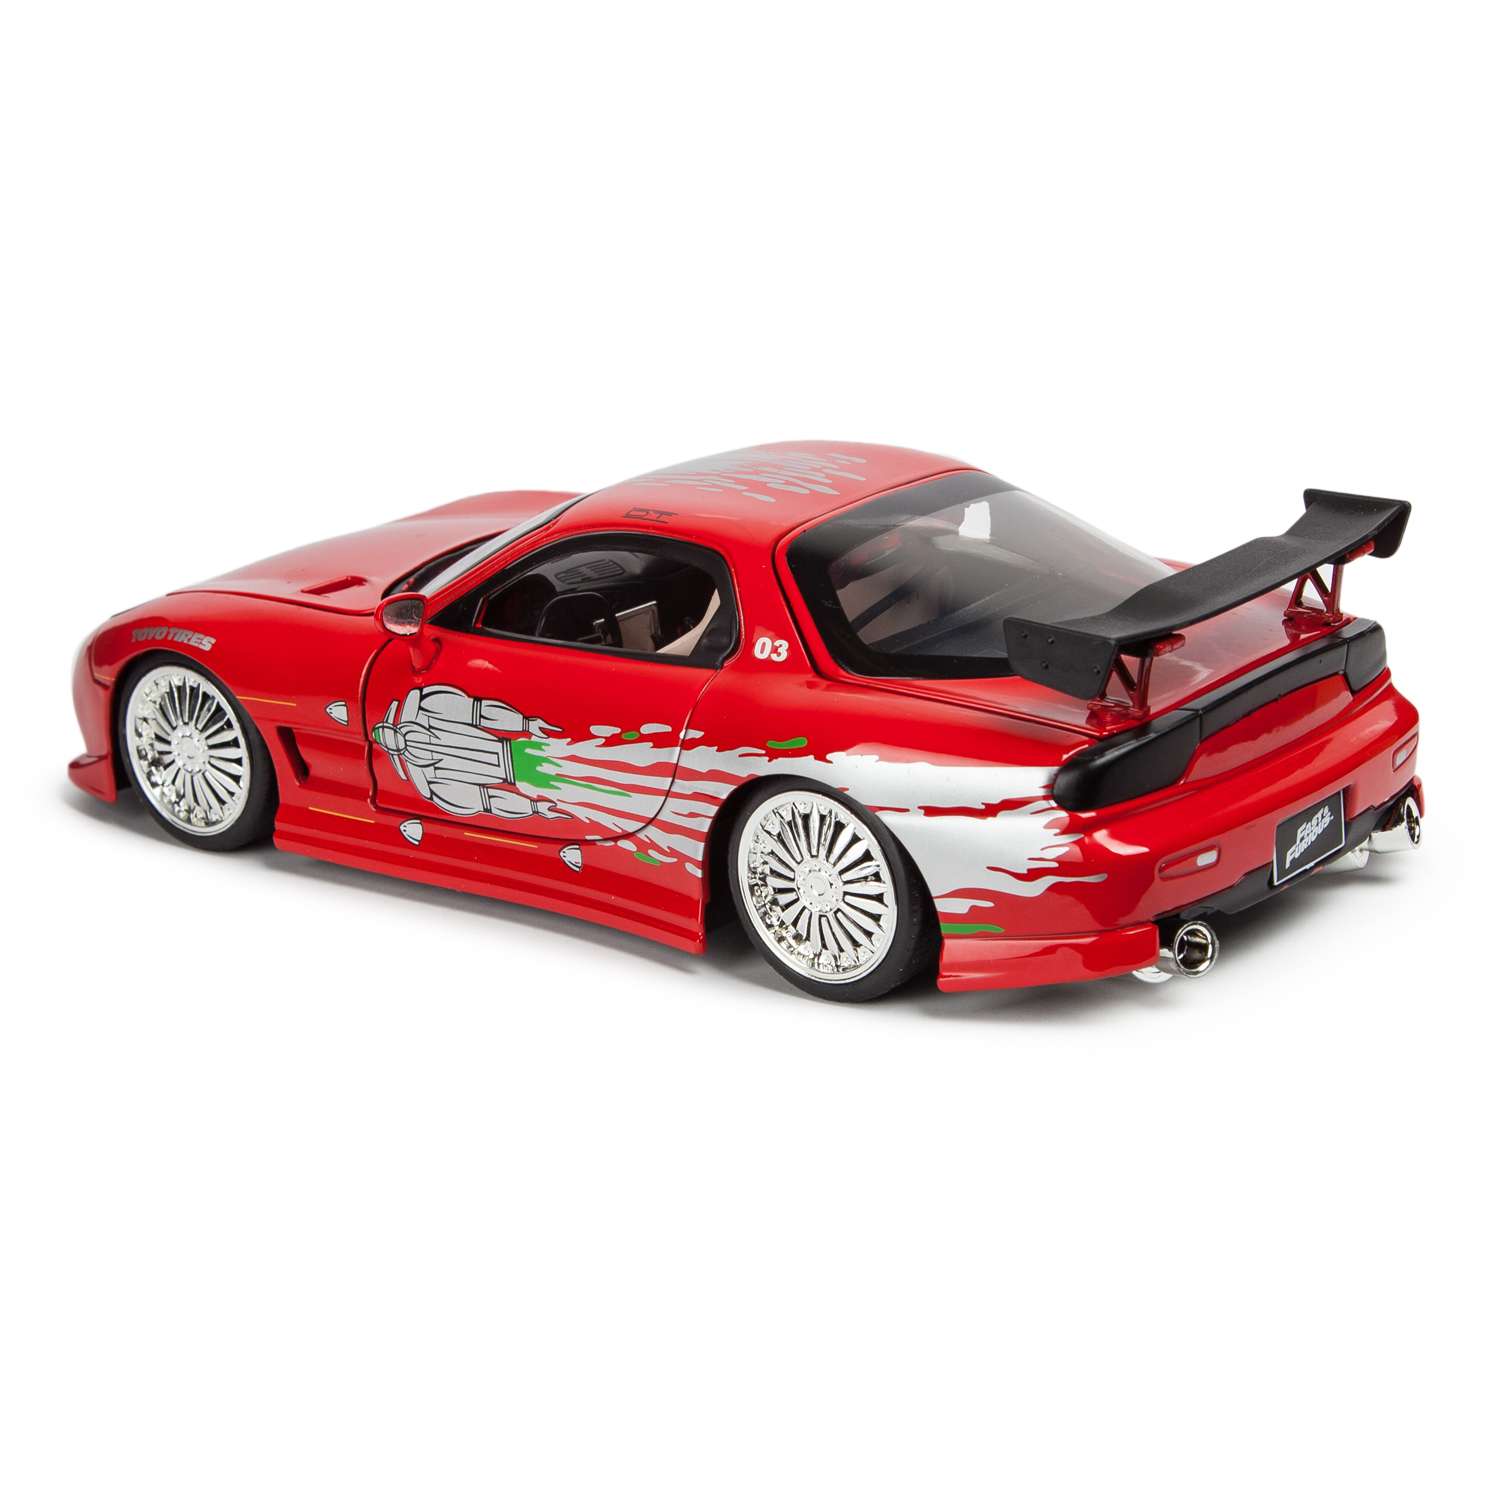 Машинка Fast and Furious Fast and Furious 1:24 1993 Mazda Rx-7 Fd3s-Wide Body Красная 98338 98338 - фото 3